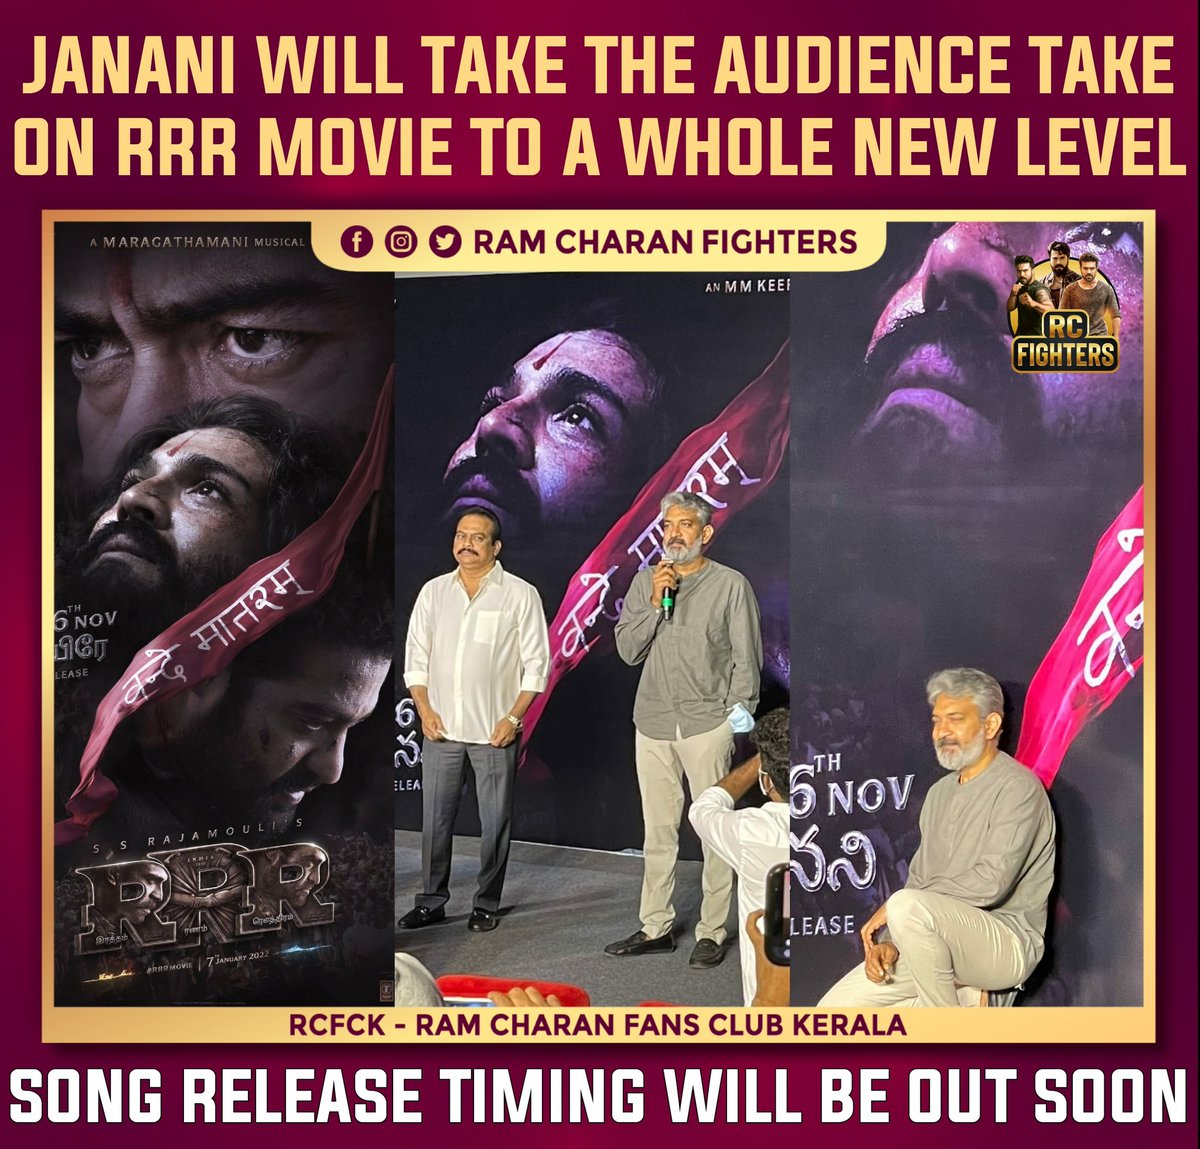 #Janani Will Take the Audience Take on #RRRMovie to a Whole New Level 🔥 Song Release Timing Will be Out Soon !! #RRRSoulAnthem #SeethaRAMaRajuCHARAN #megapowerstar #megastarchiranjeevi #rrrmovie #ramcharanfans #RCFCK #rcfck_official #cboe_official #rc16 #RamCharanFansKerala